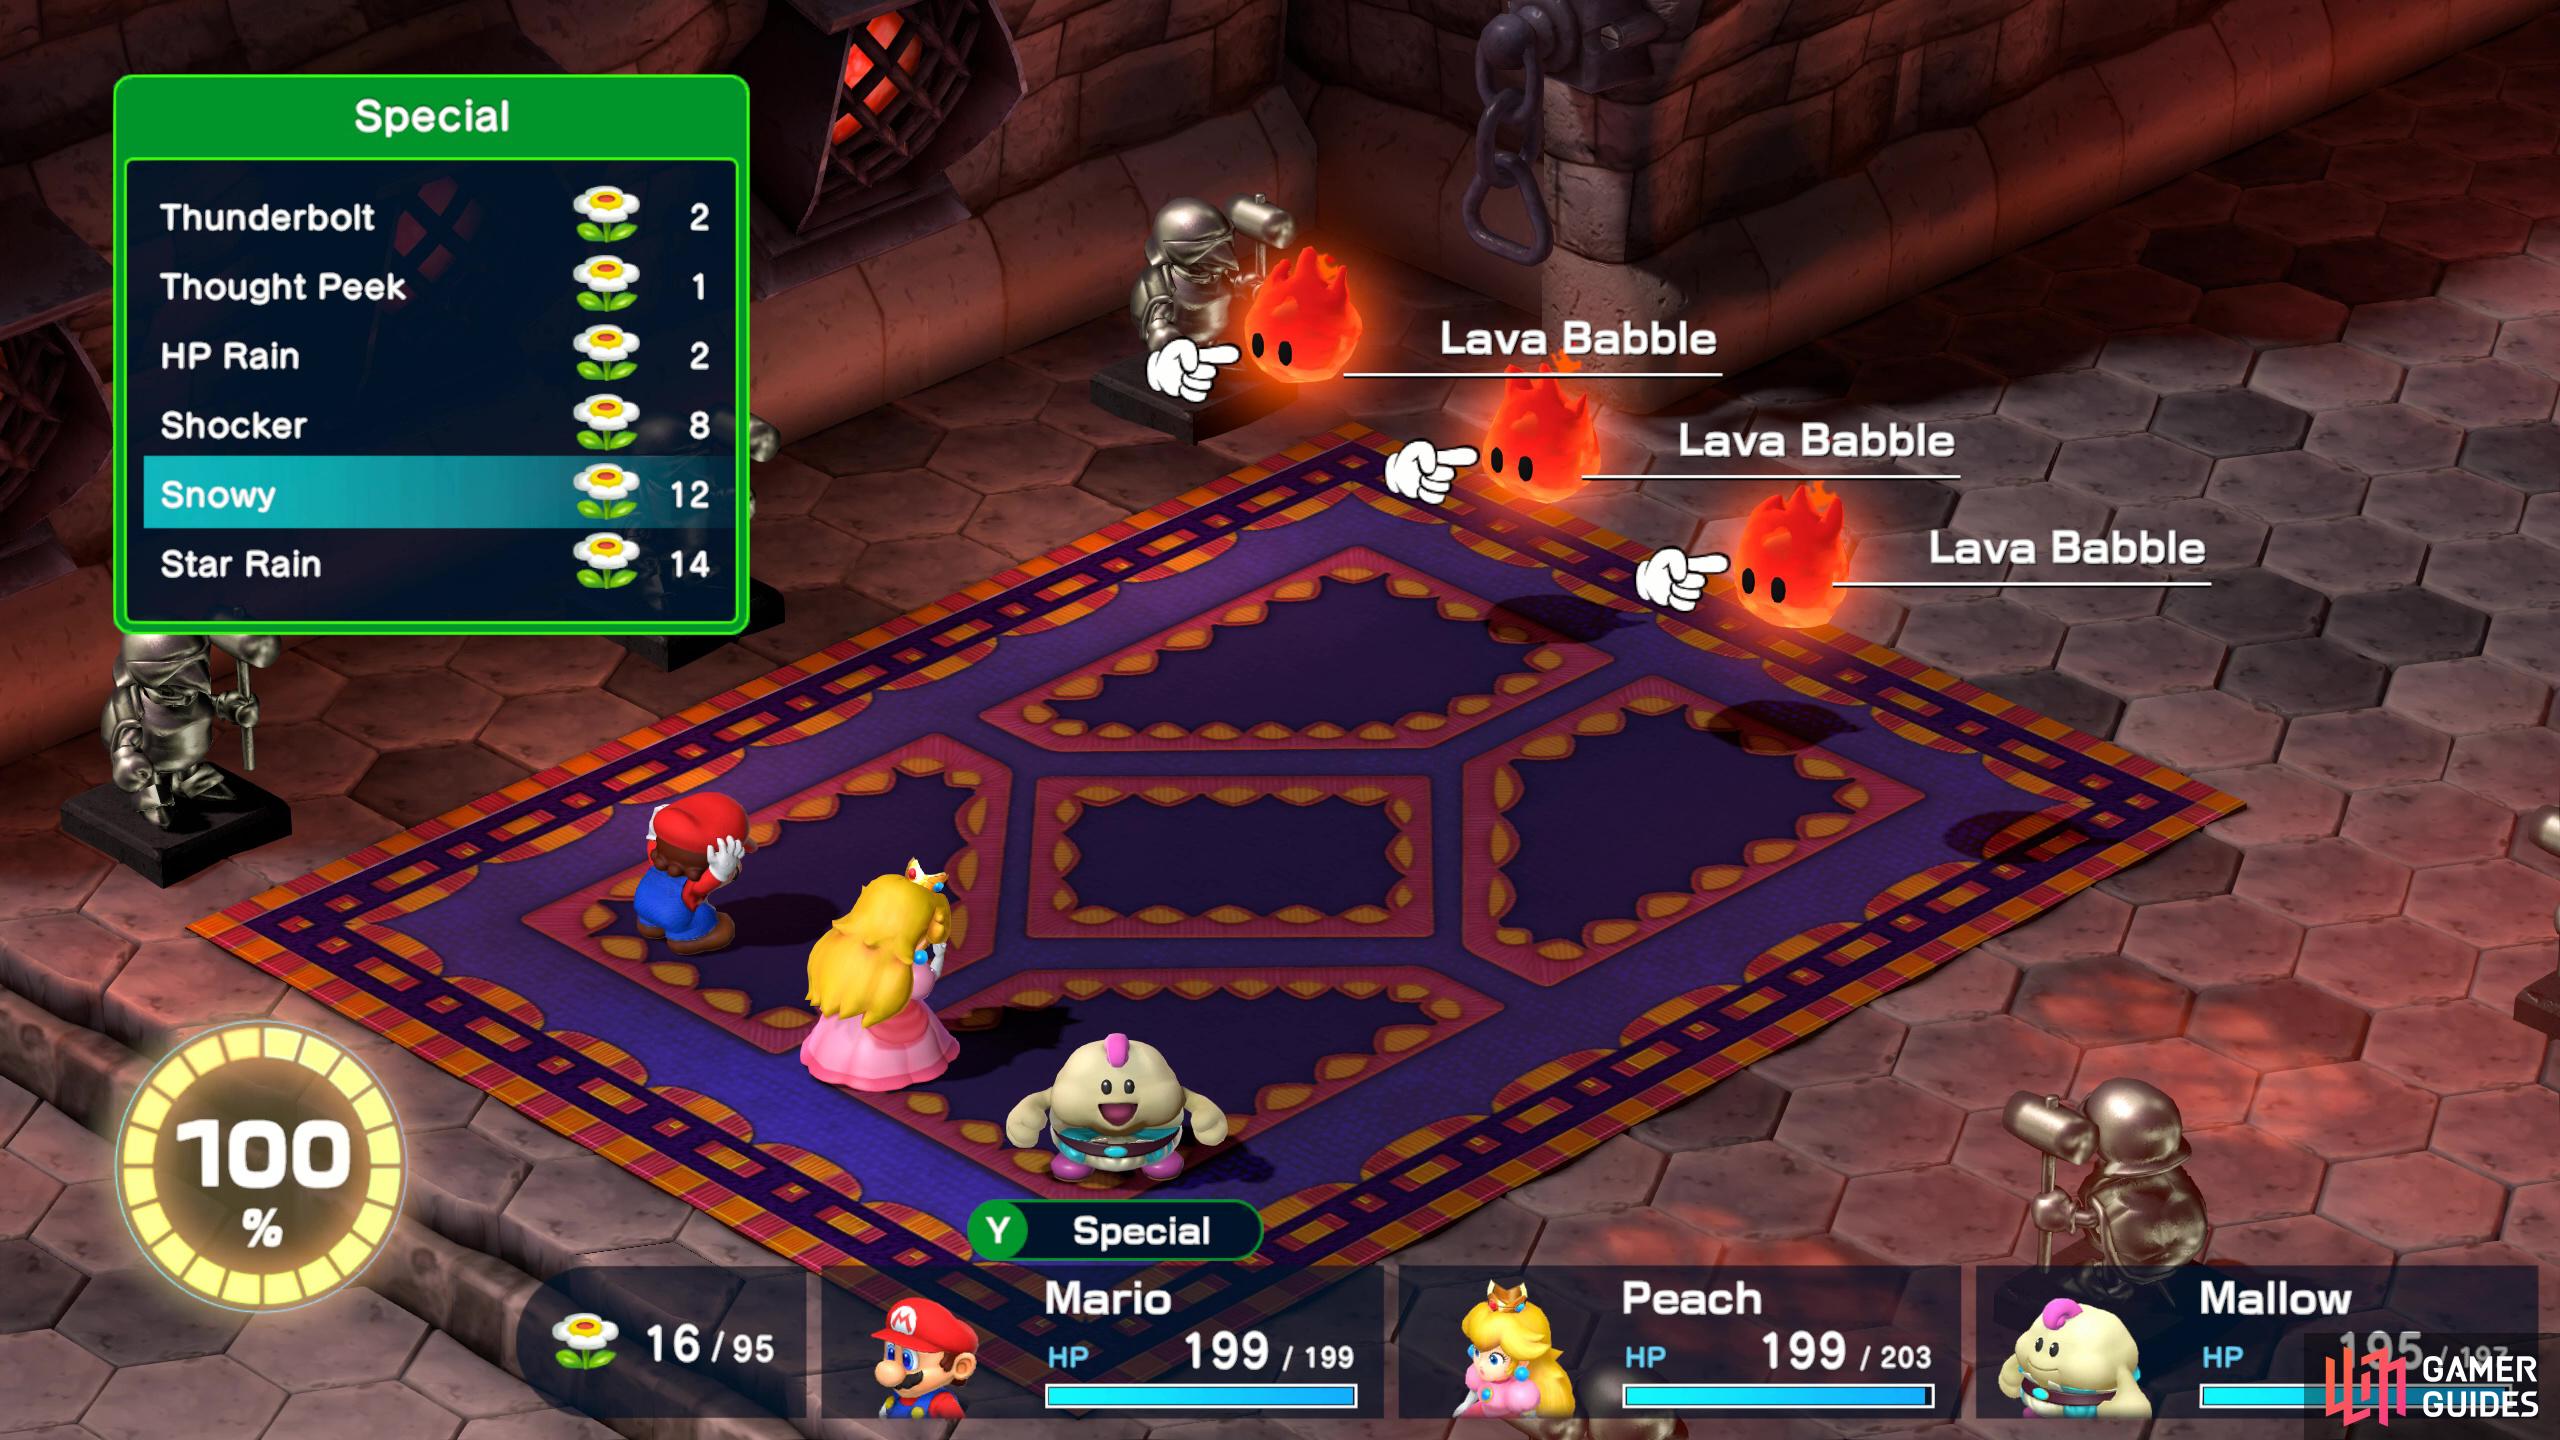 Battle Course 1 - Room 3 - Battle 1: The first fight in Room 3 is against three Lava Babbles.